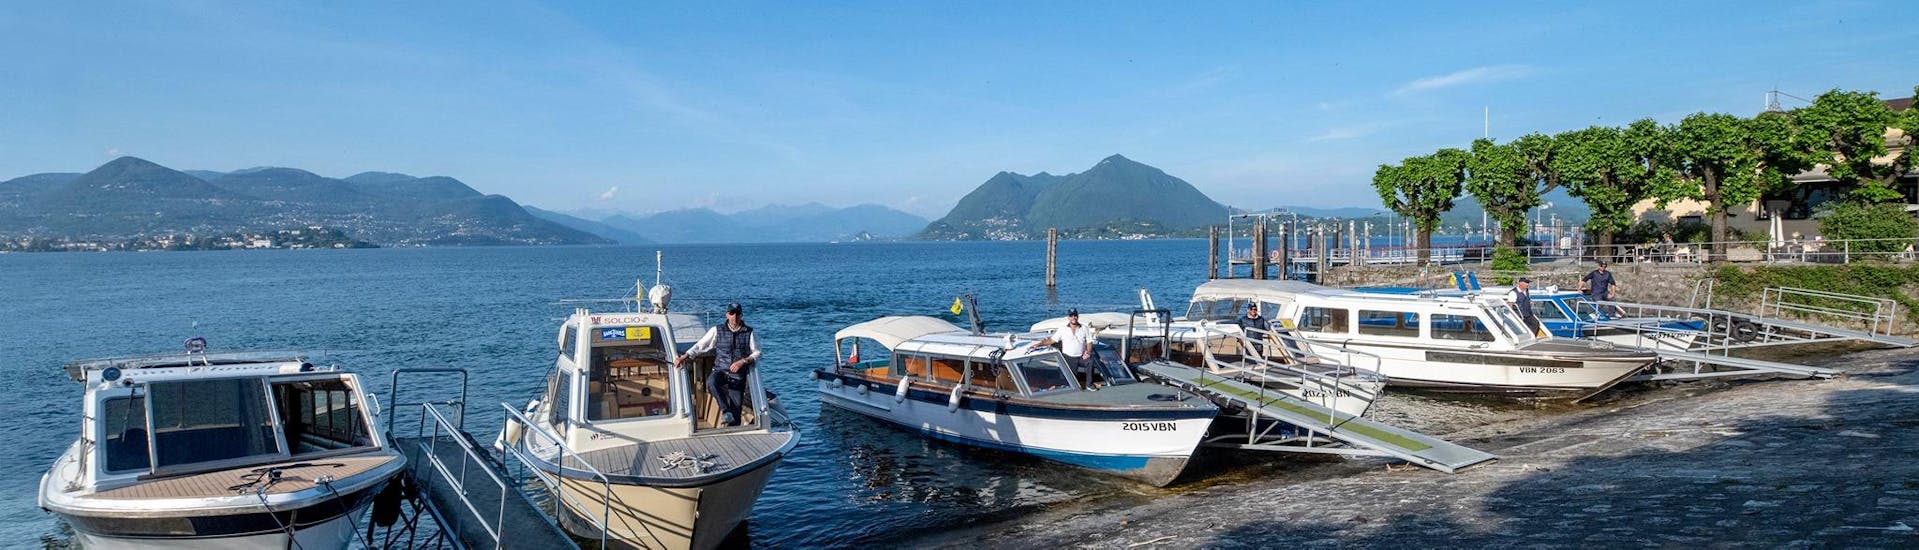 View of the boats used for the tranfers to the Borromean Islands by Lake Tours Stresa.